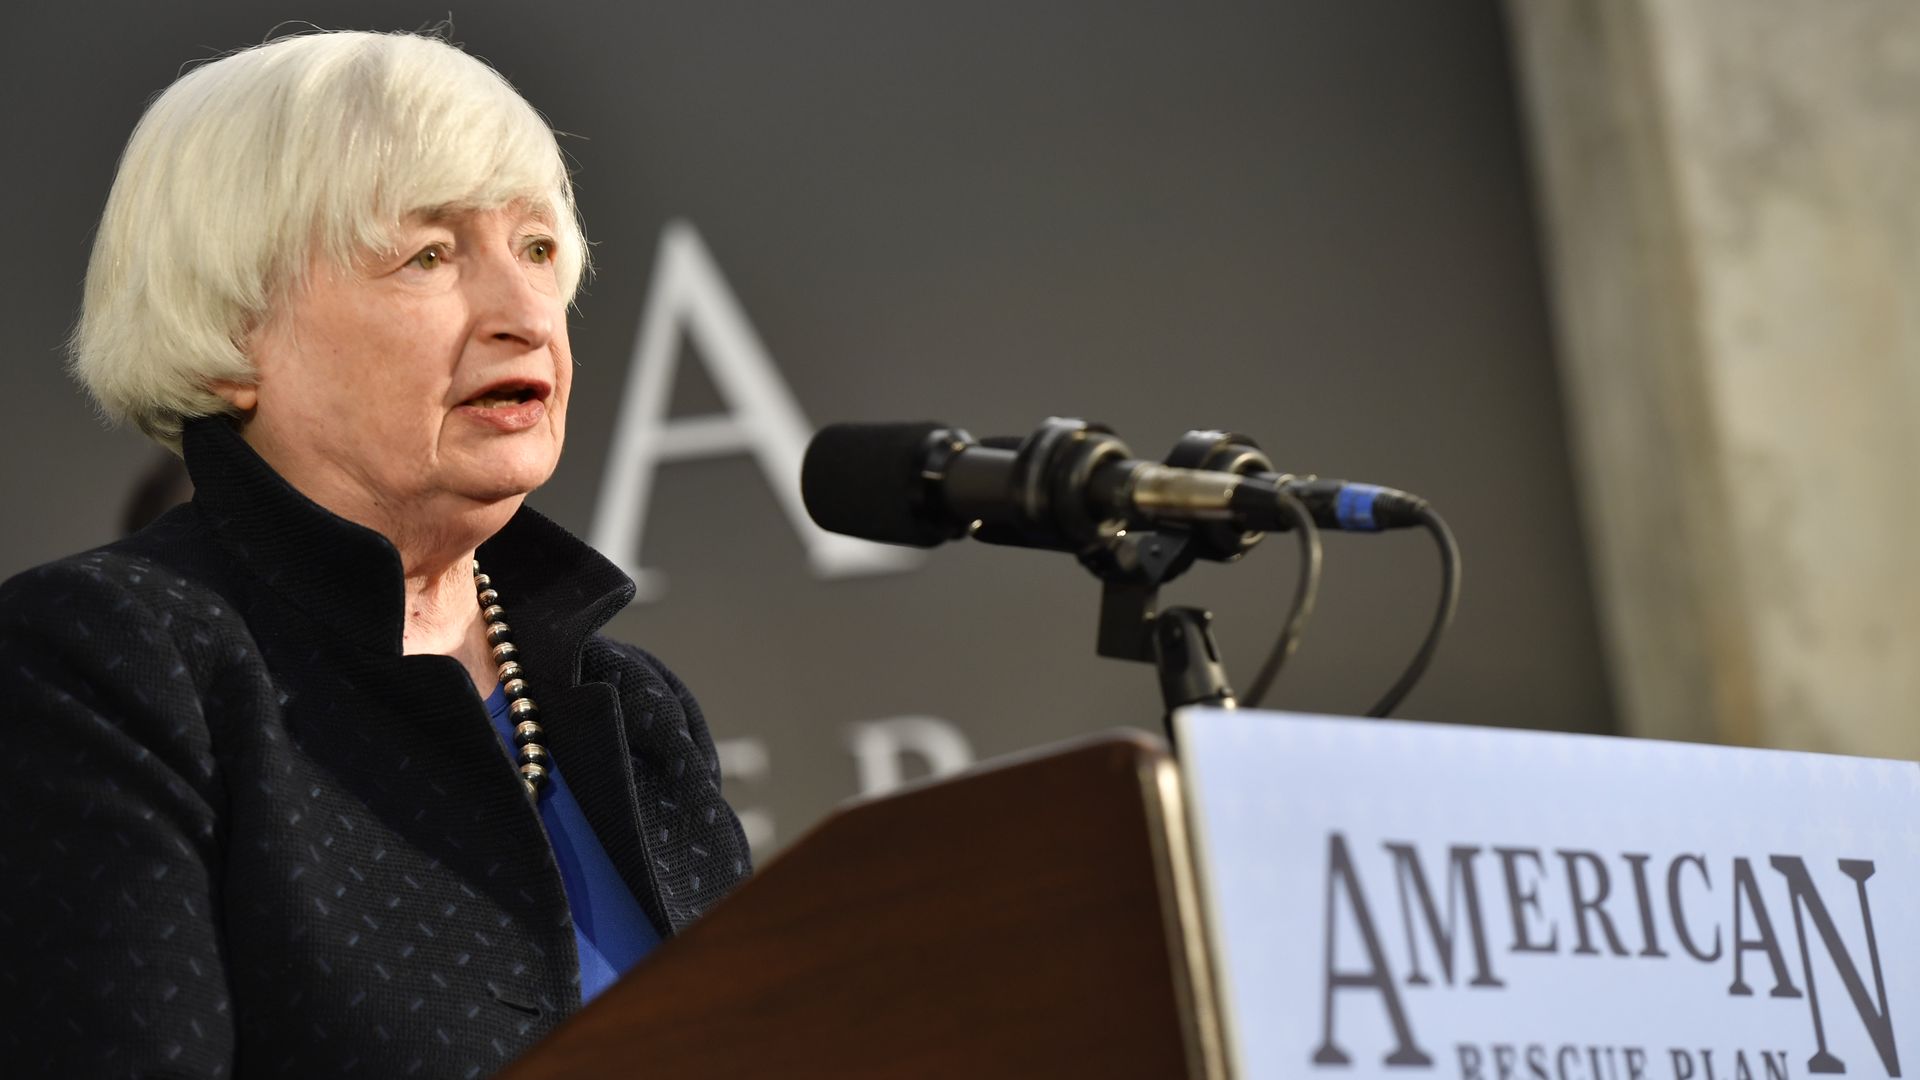 Treasury Secretary Janet Yellen speaks at a podium with the sign "American Rescue Plan"  